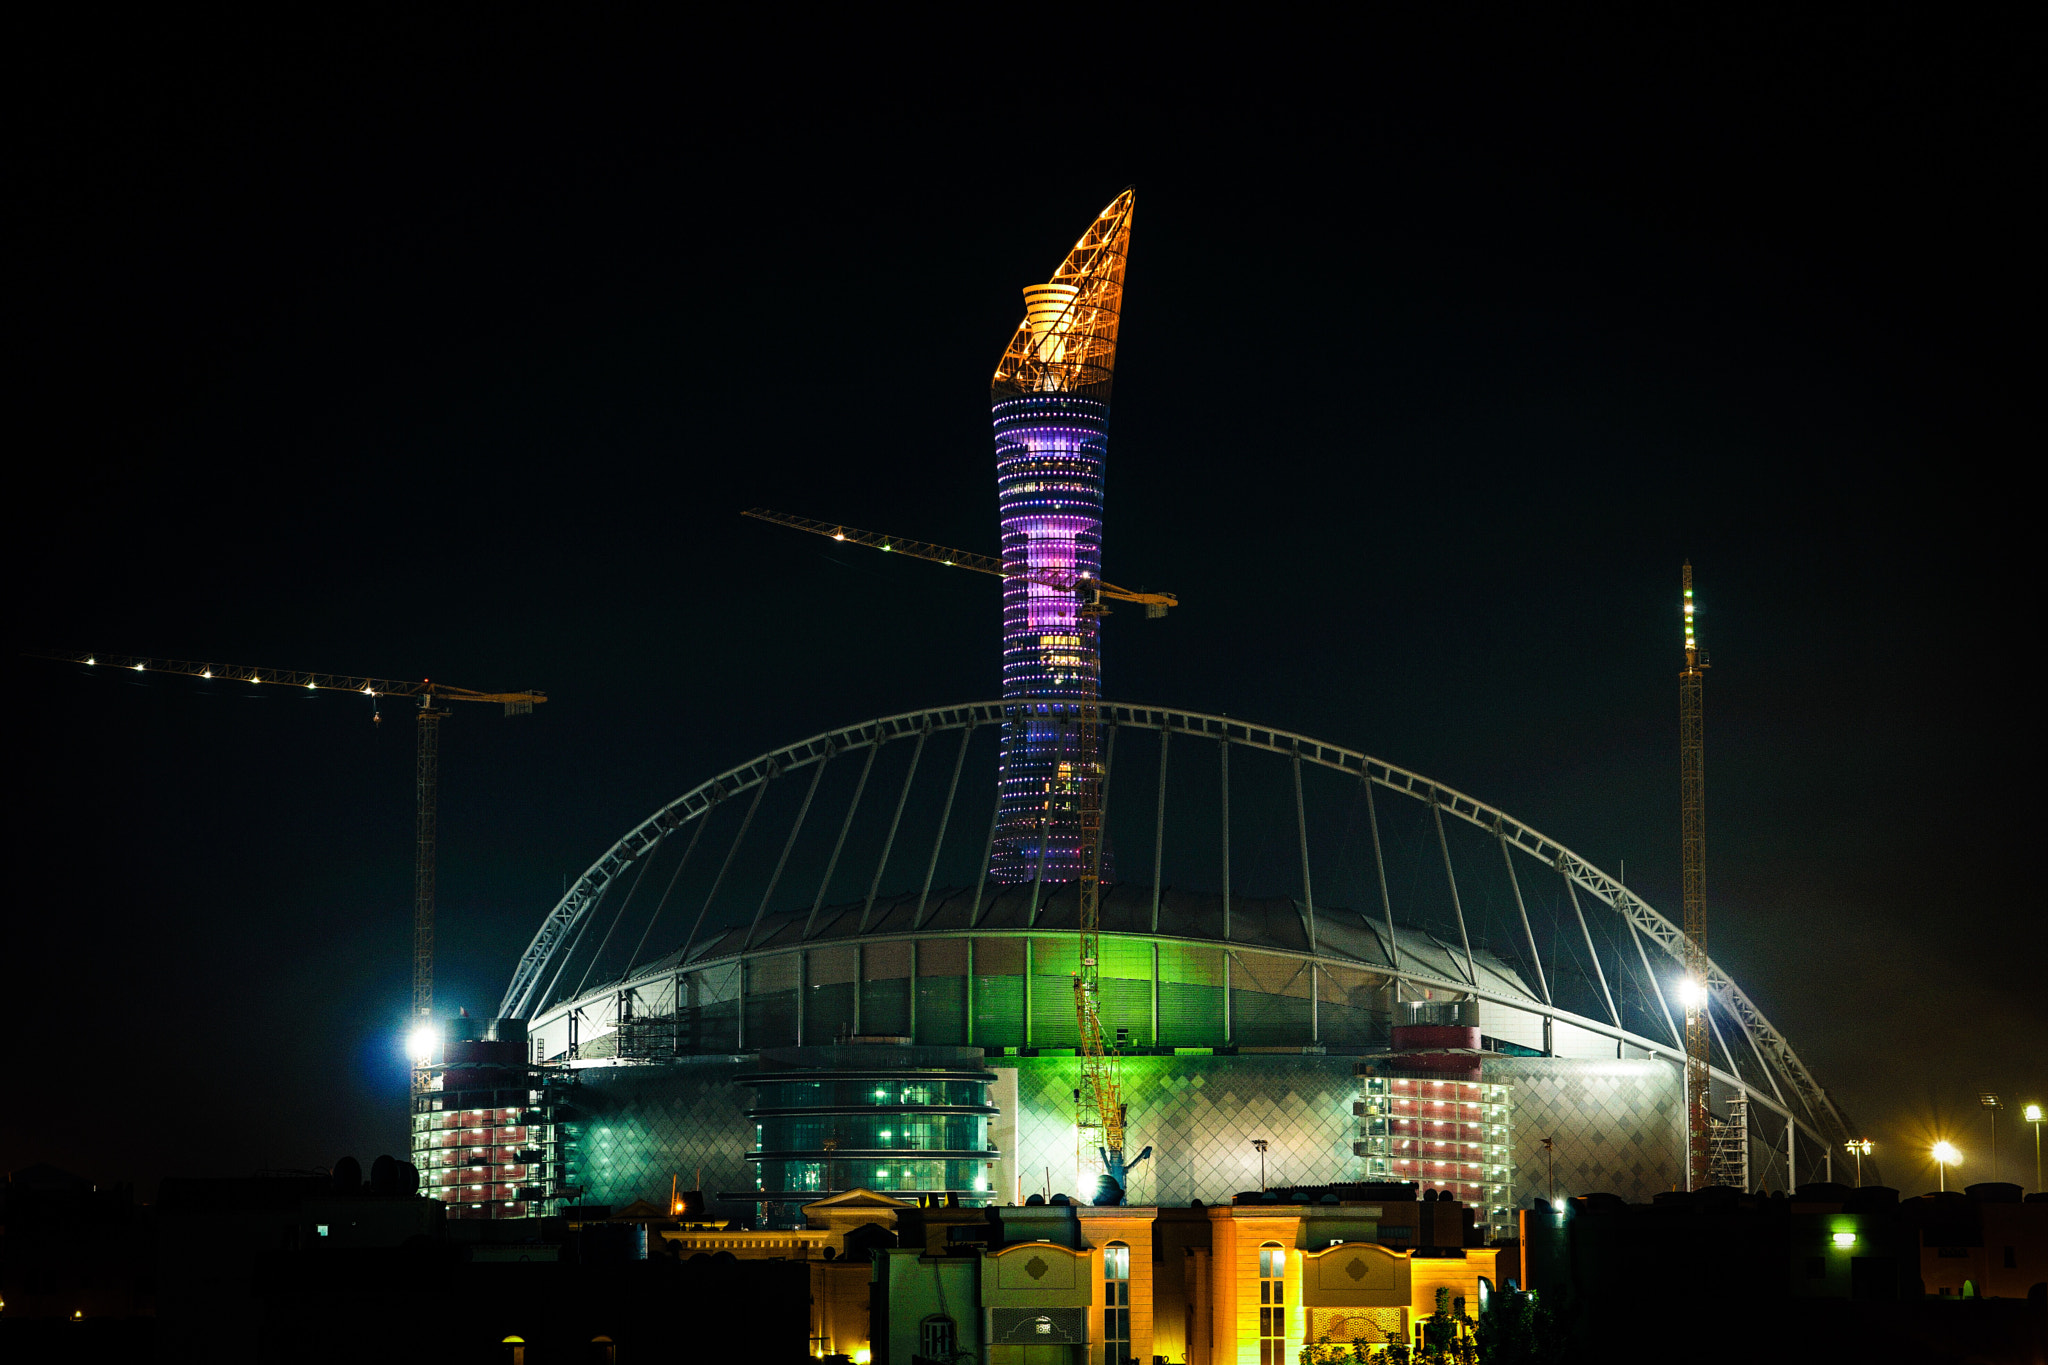 Sony a6500 sample photo. Aspire zone construction for the 2022 fifa world c ... photography